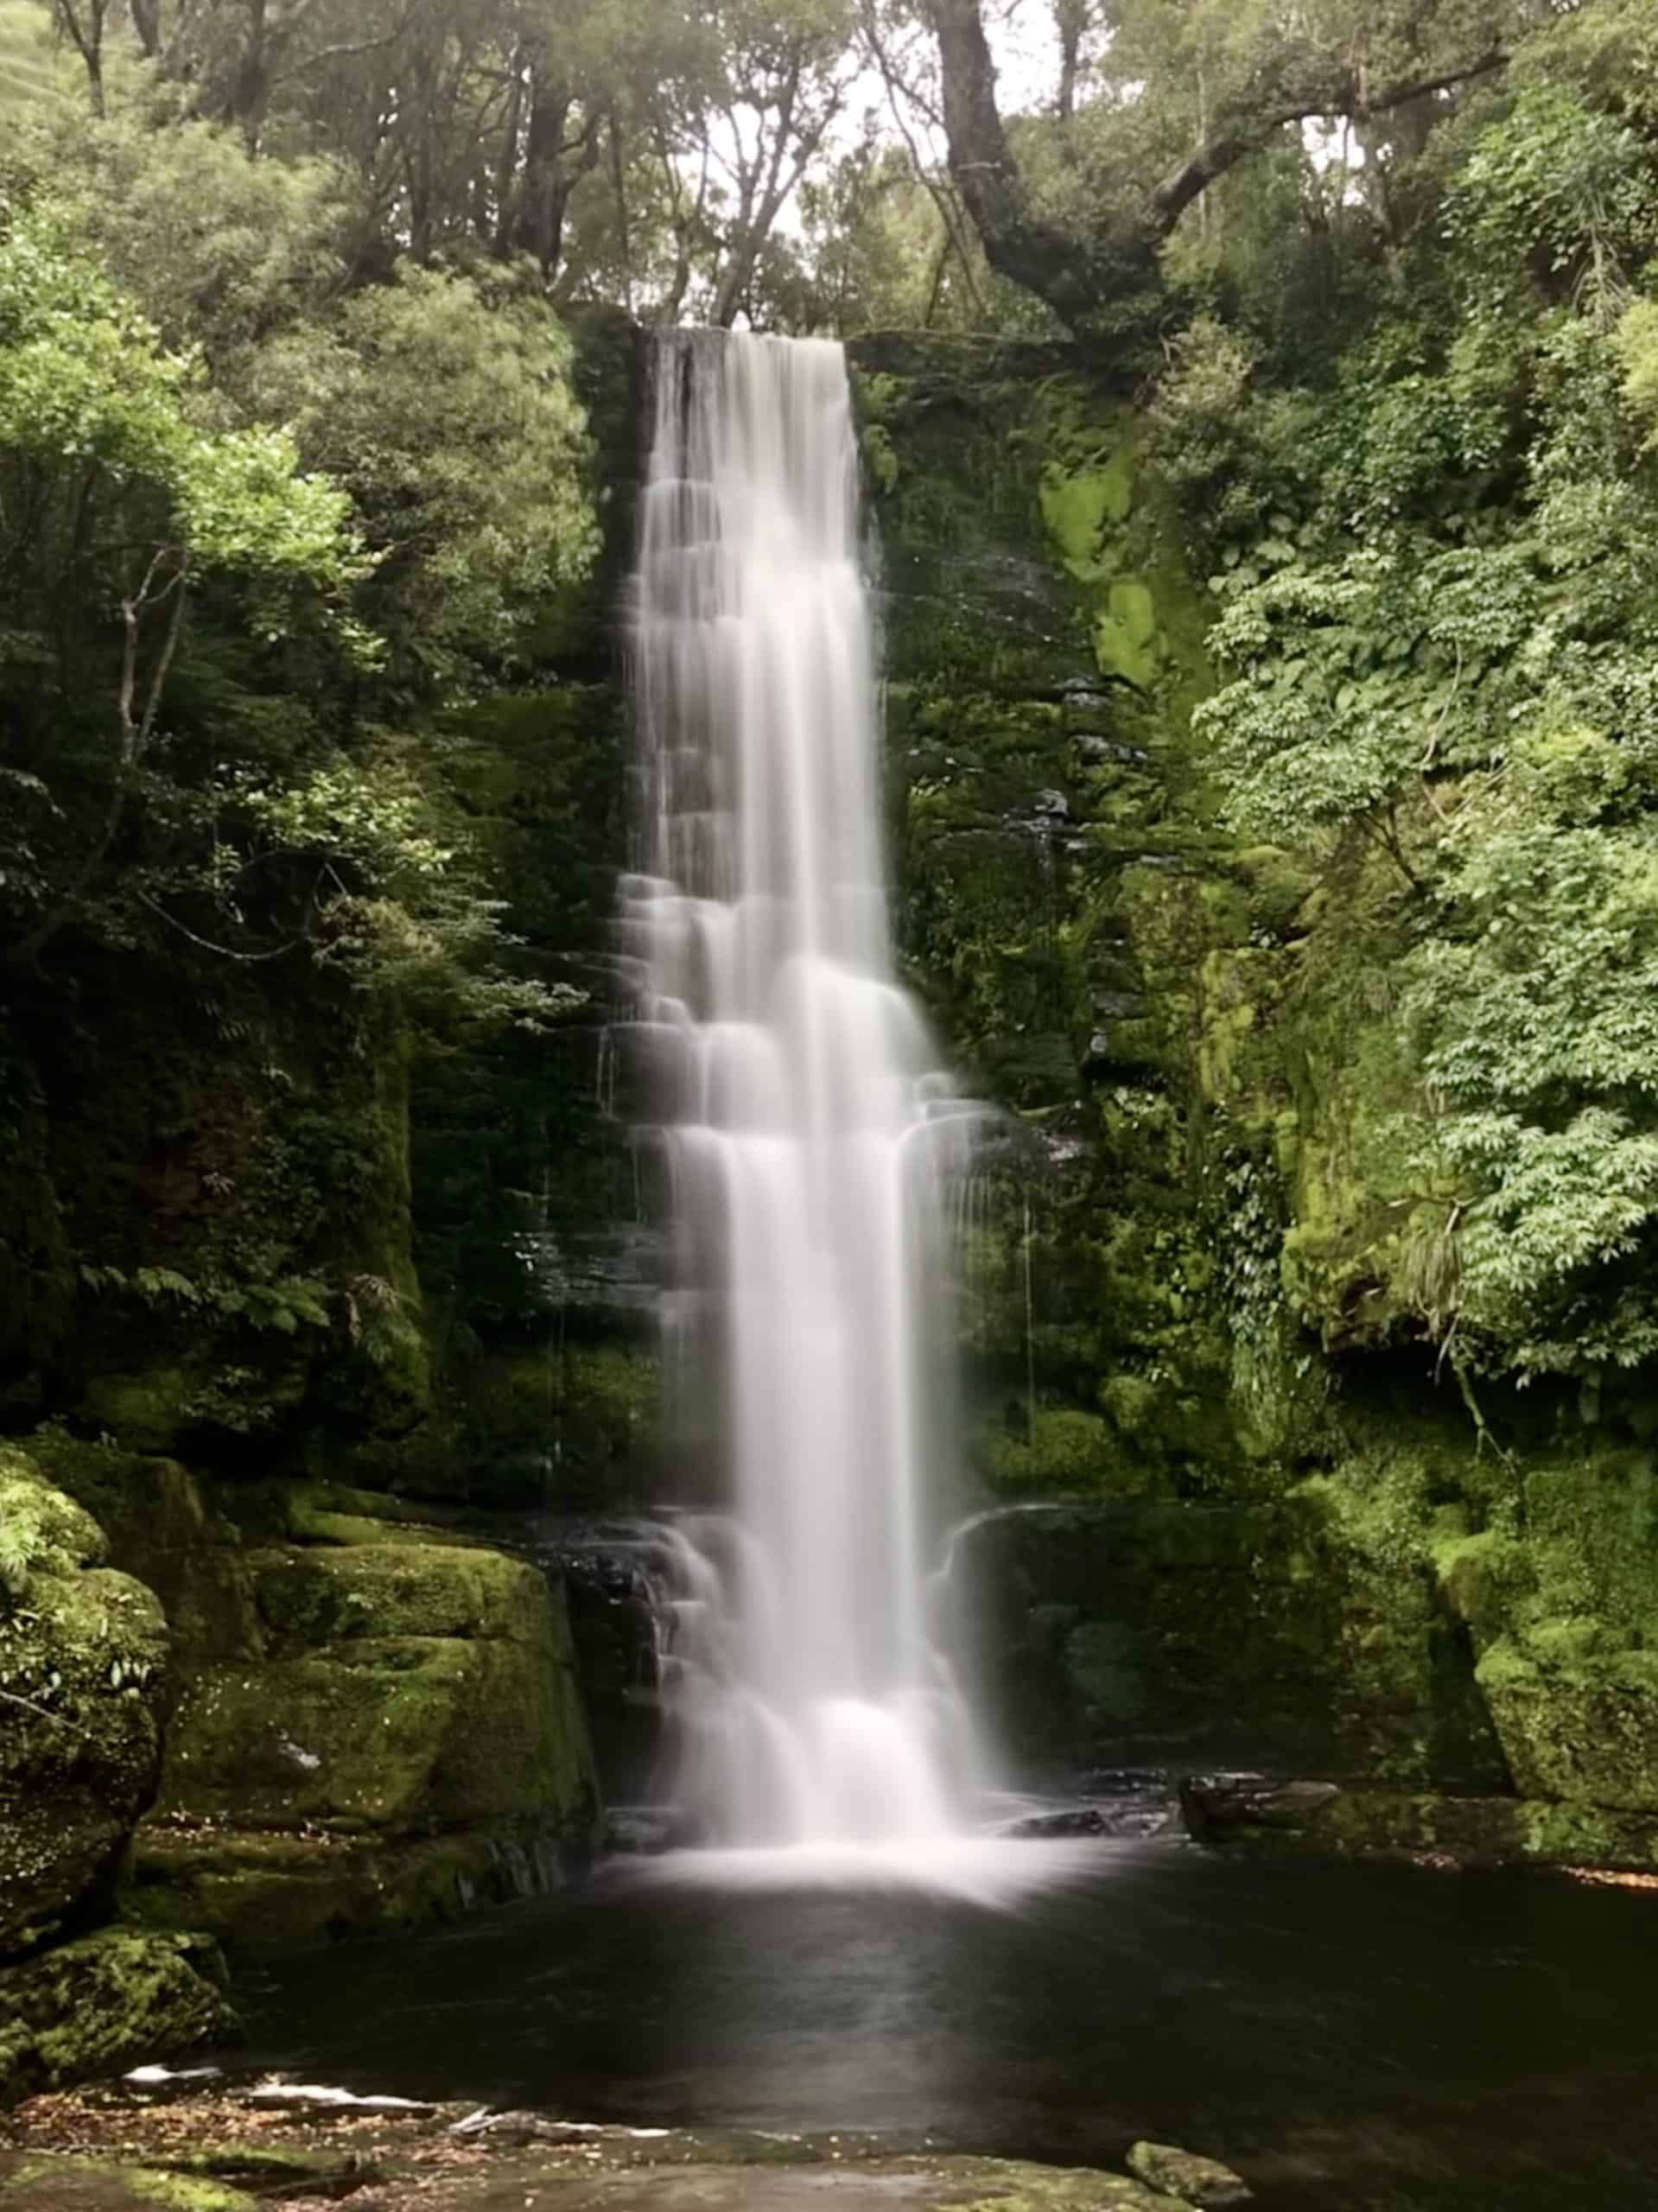 McLean Waterfall was our favourite of the Catlins waterfalls